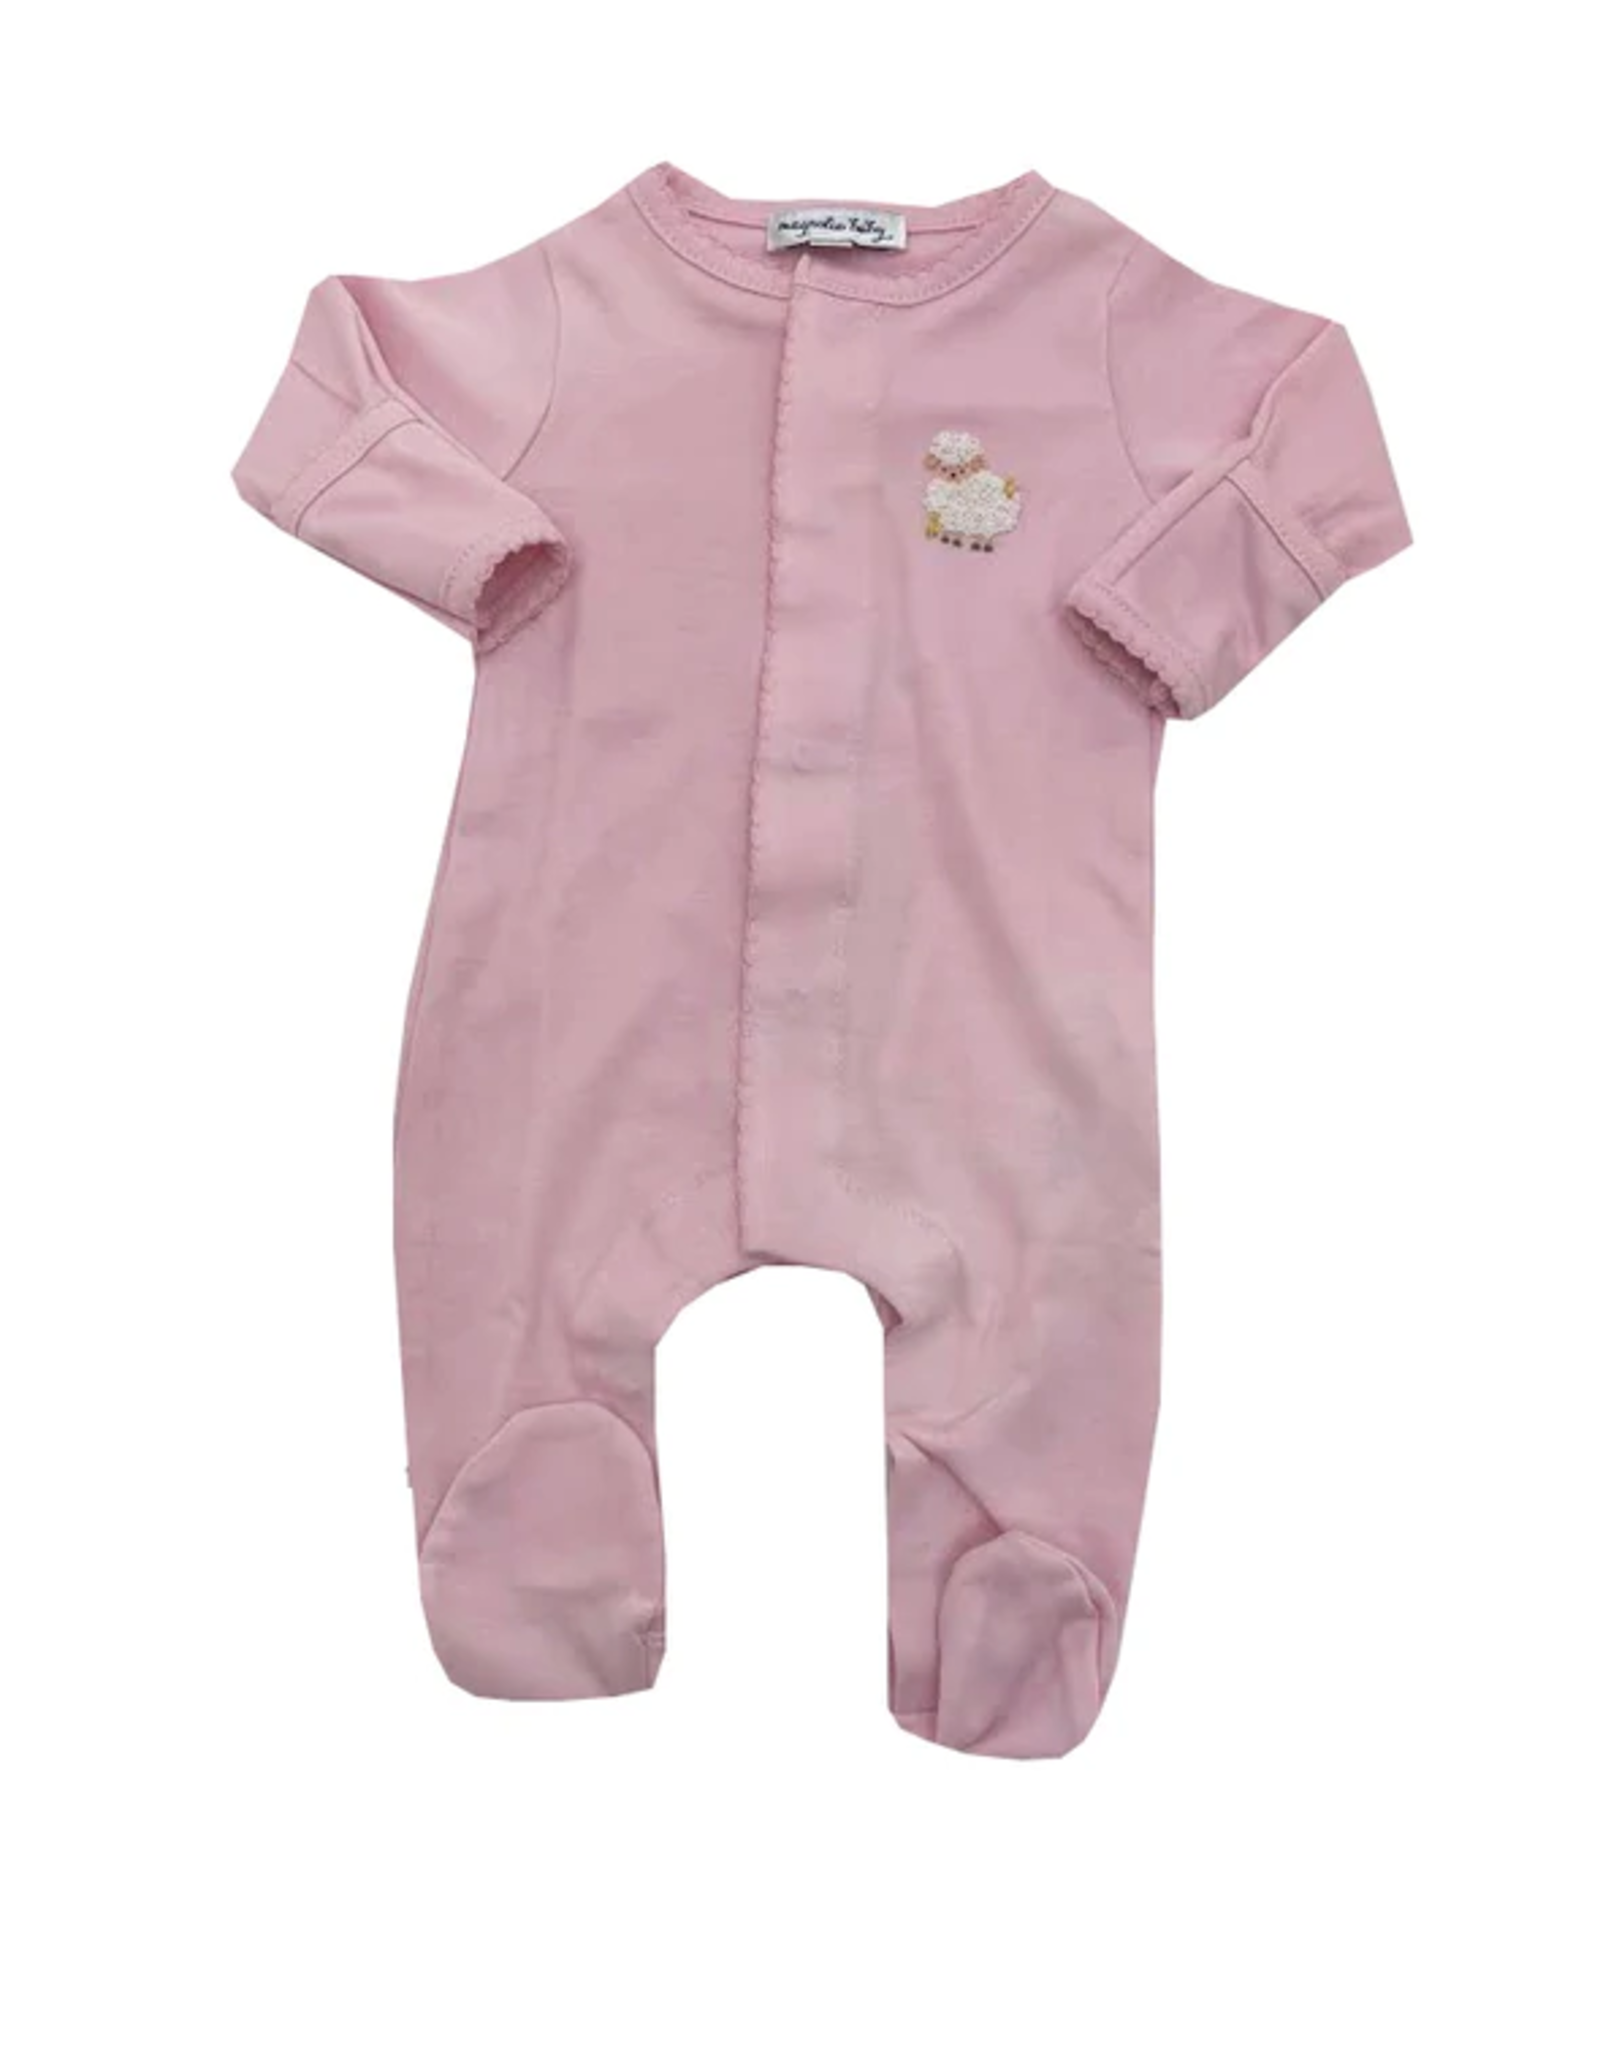 Magnolia Baby Tiny Lamb and Chicks Emb Footie Pink